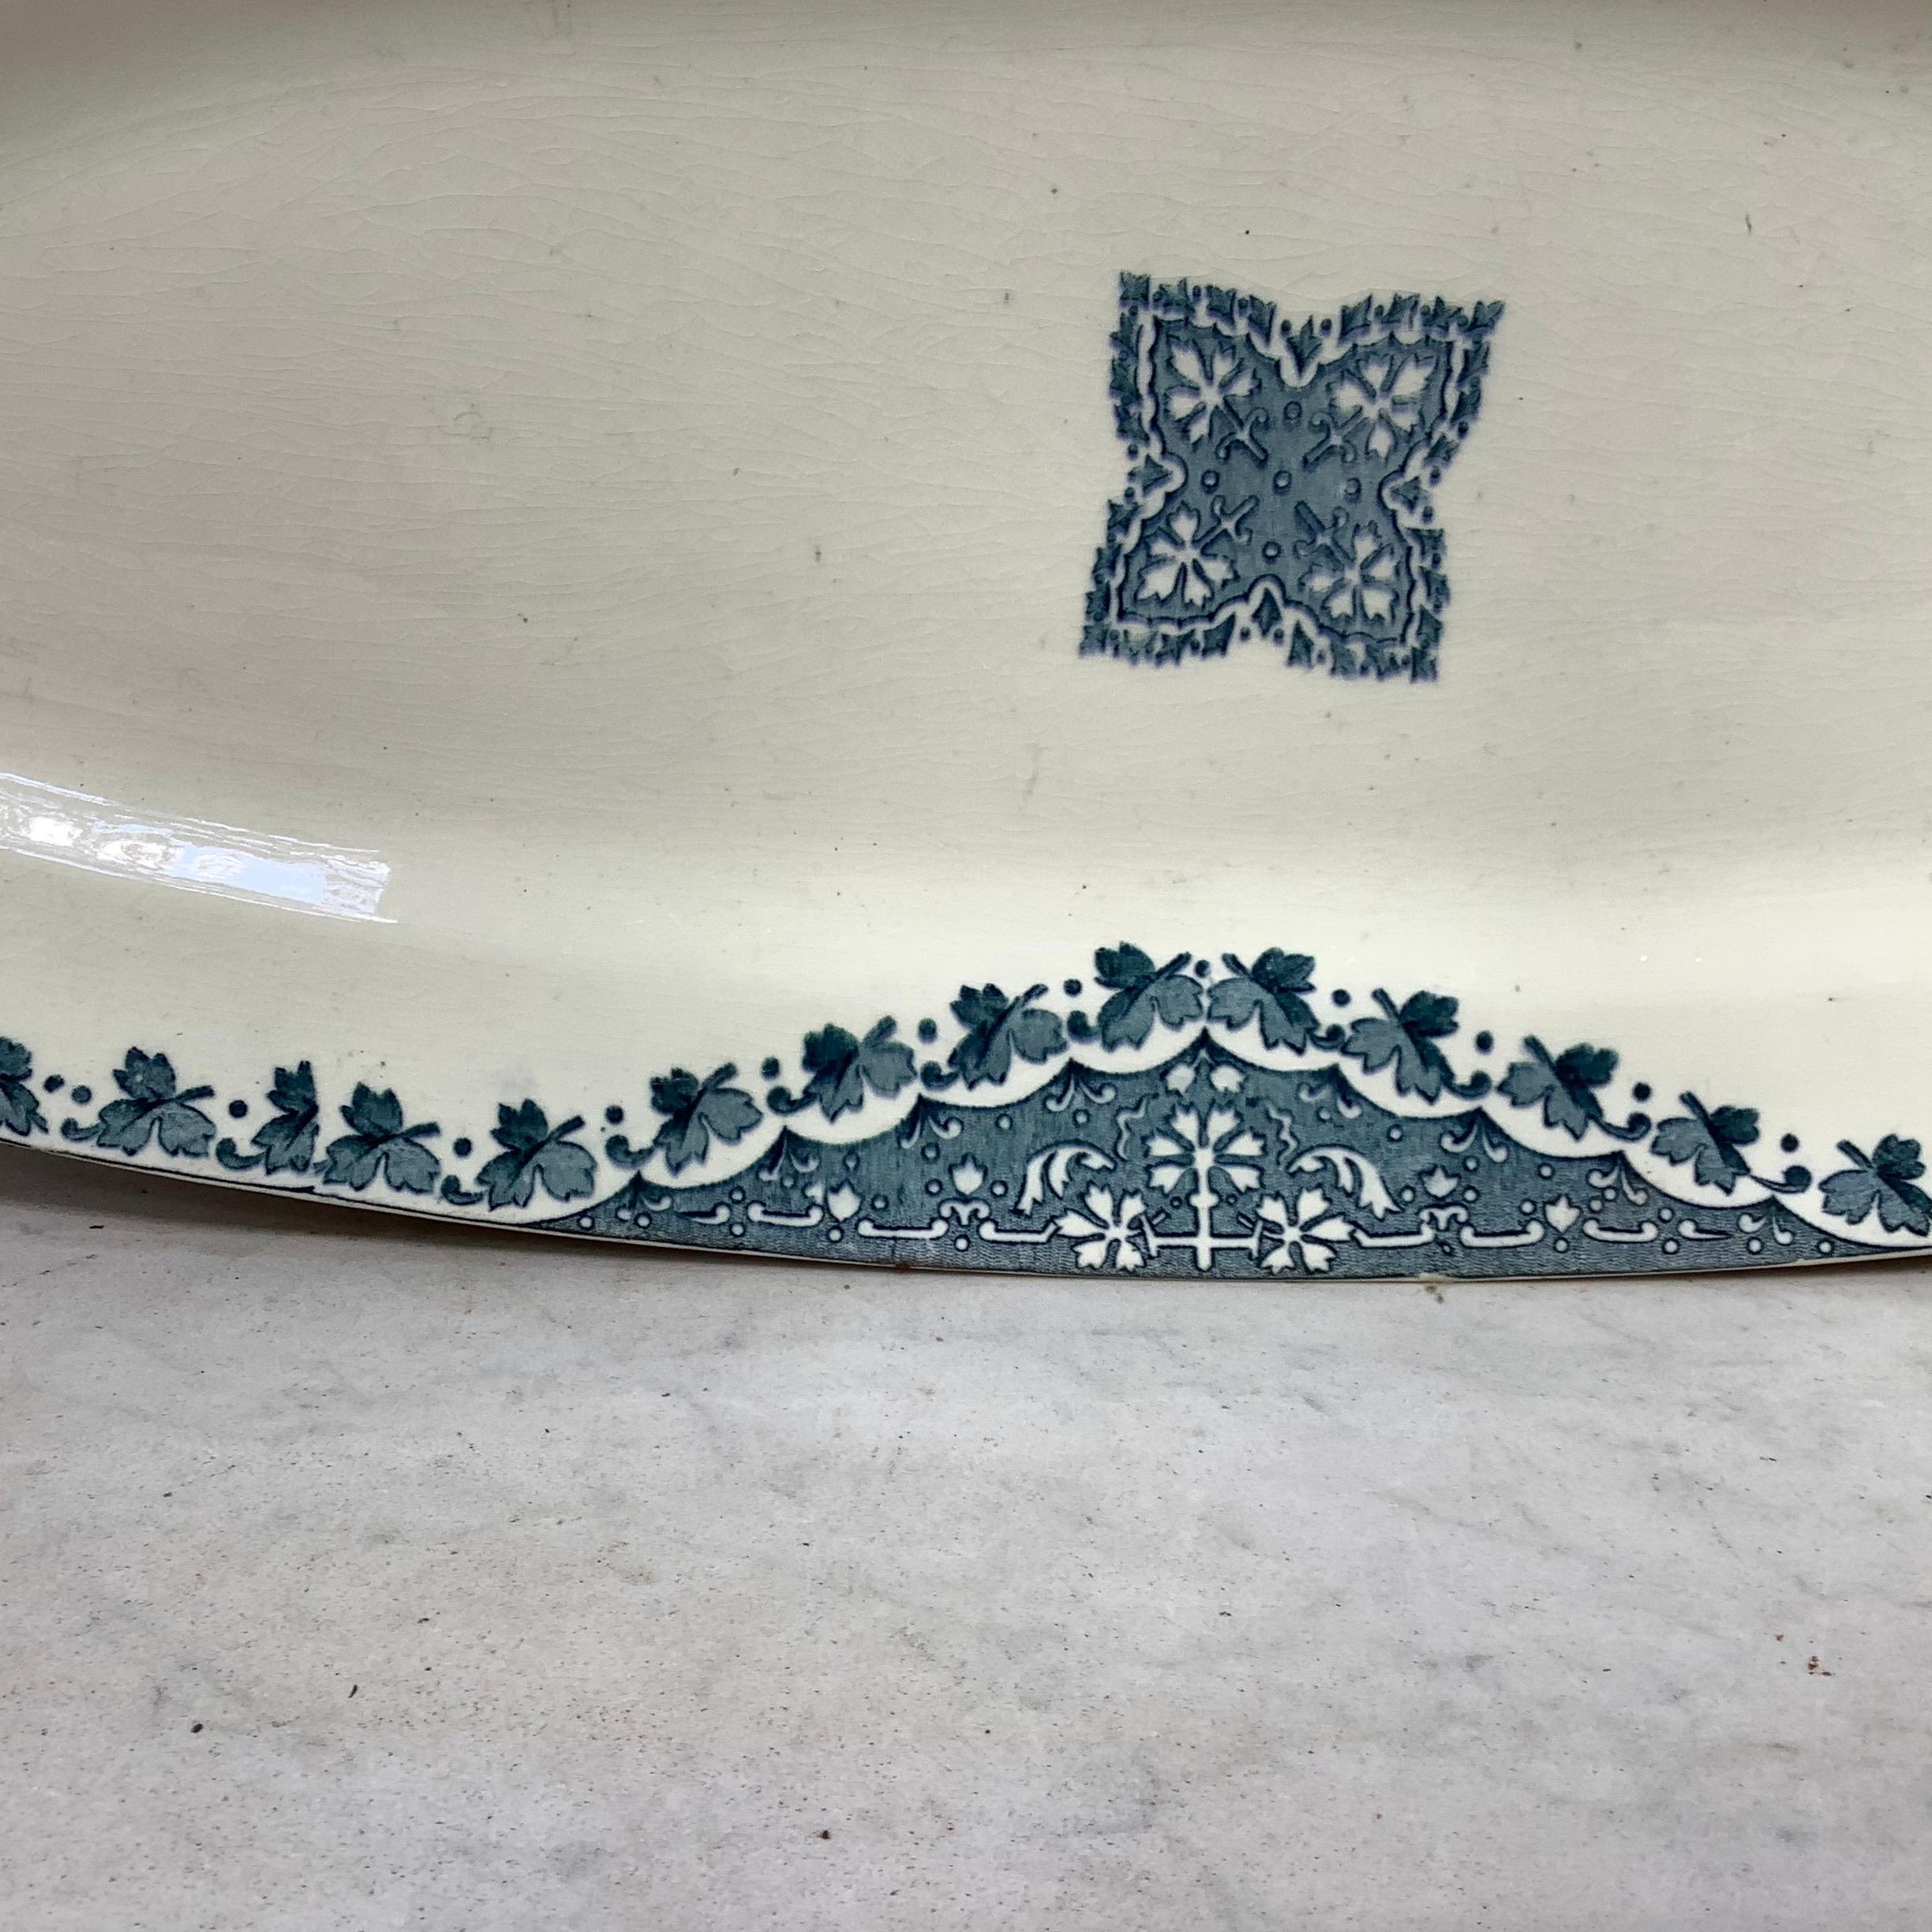 French faience blue and white fish platter signed Longwy, circa 1900.
Measures: 21.5